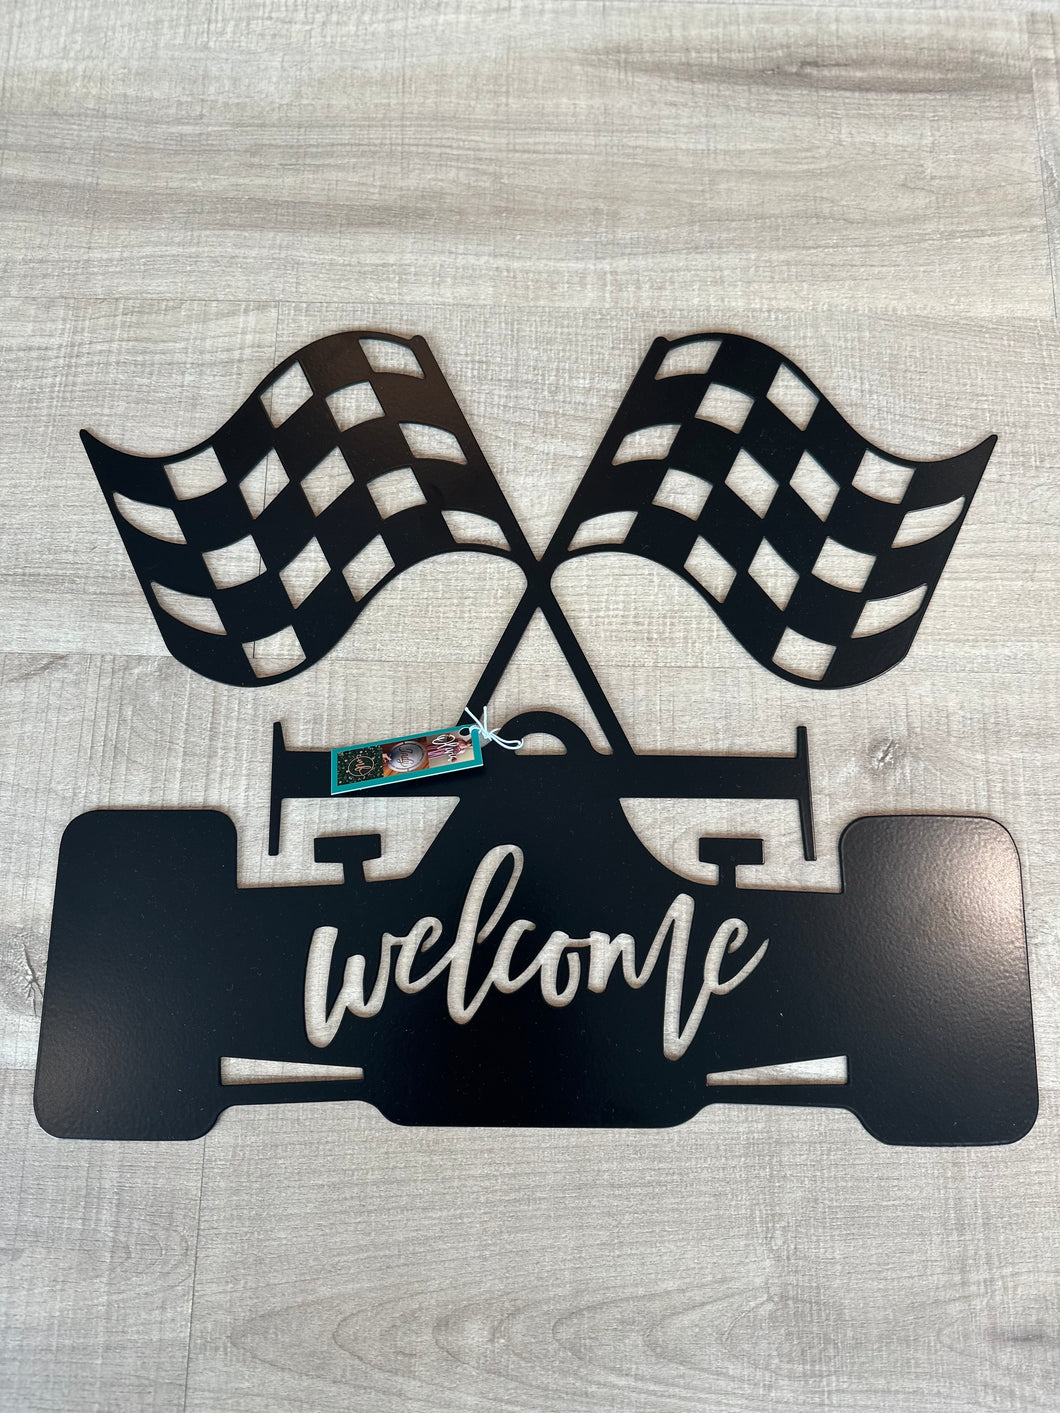 Welcome Race Fans Sign | Metal Race Car & Flags